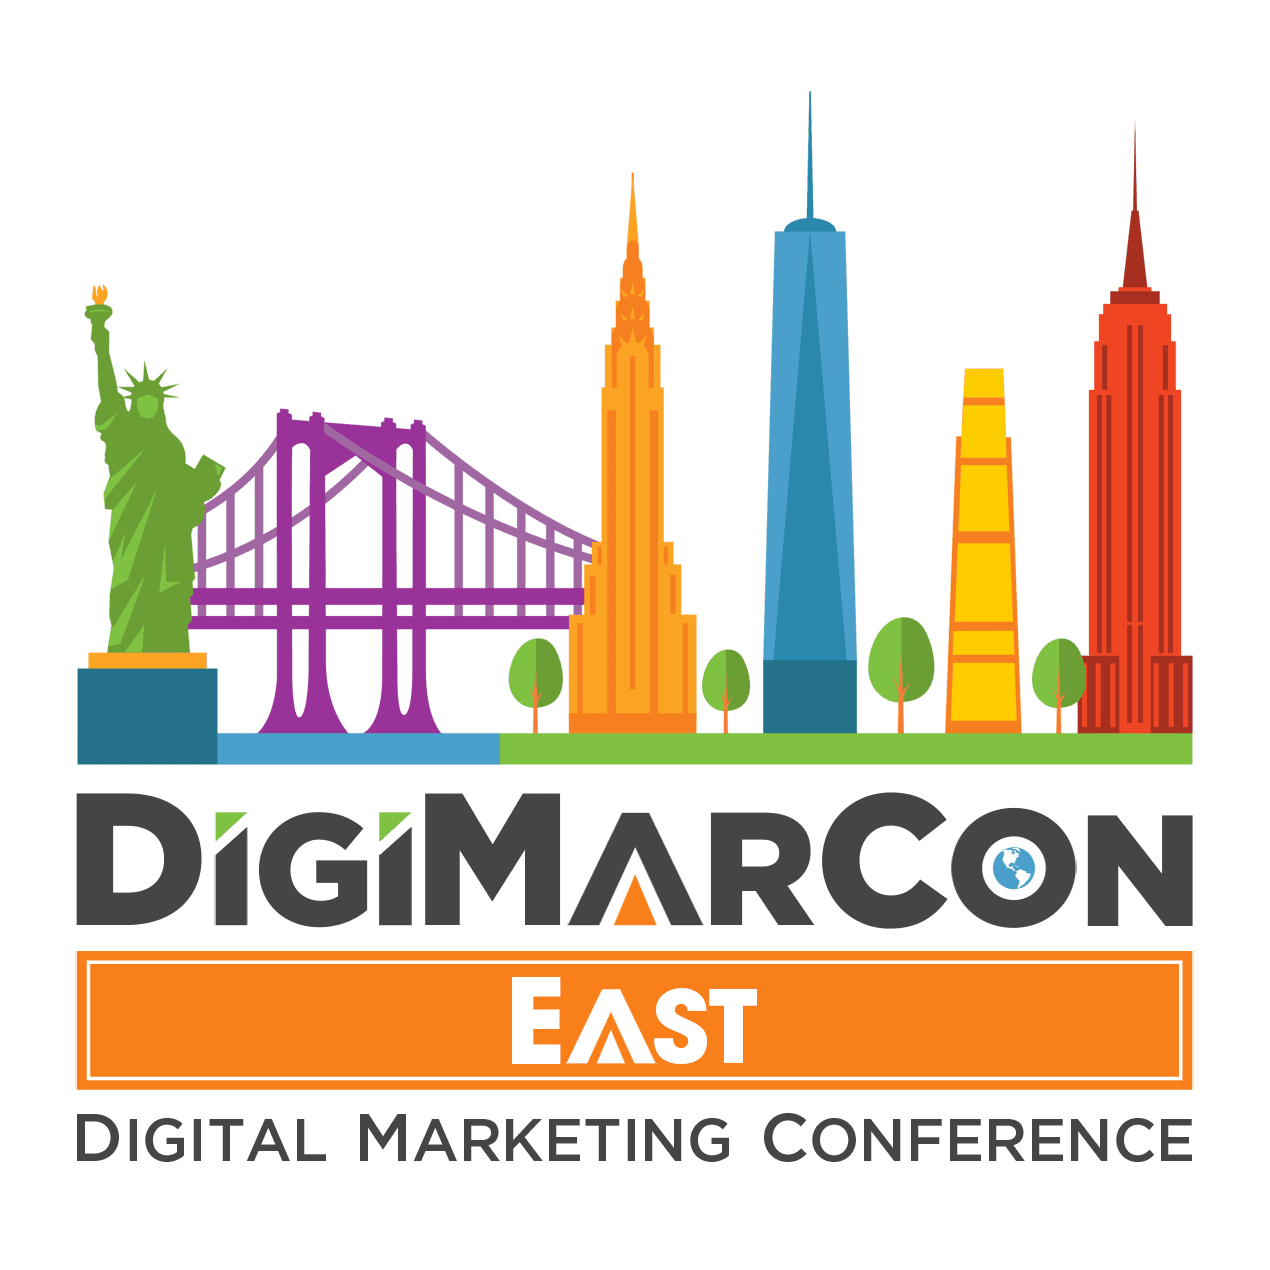 DigiMarCon Canada East 2022 - Digital Marketing, Media and Advertising Conference & Exhibition